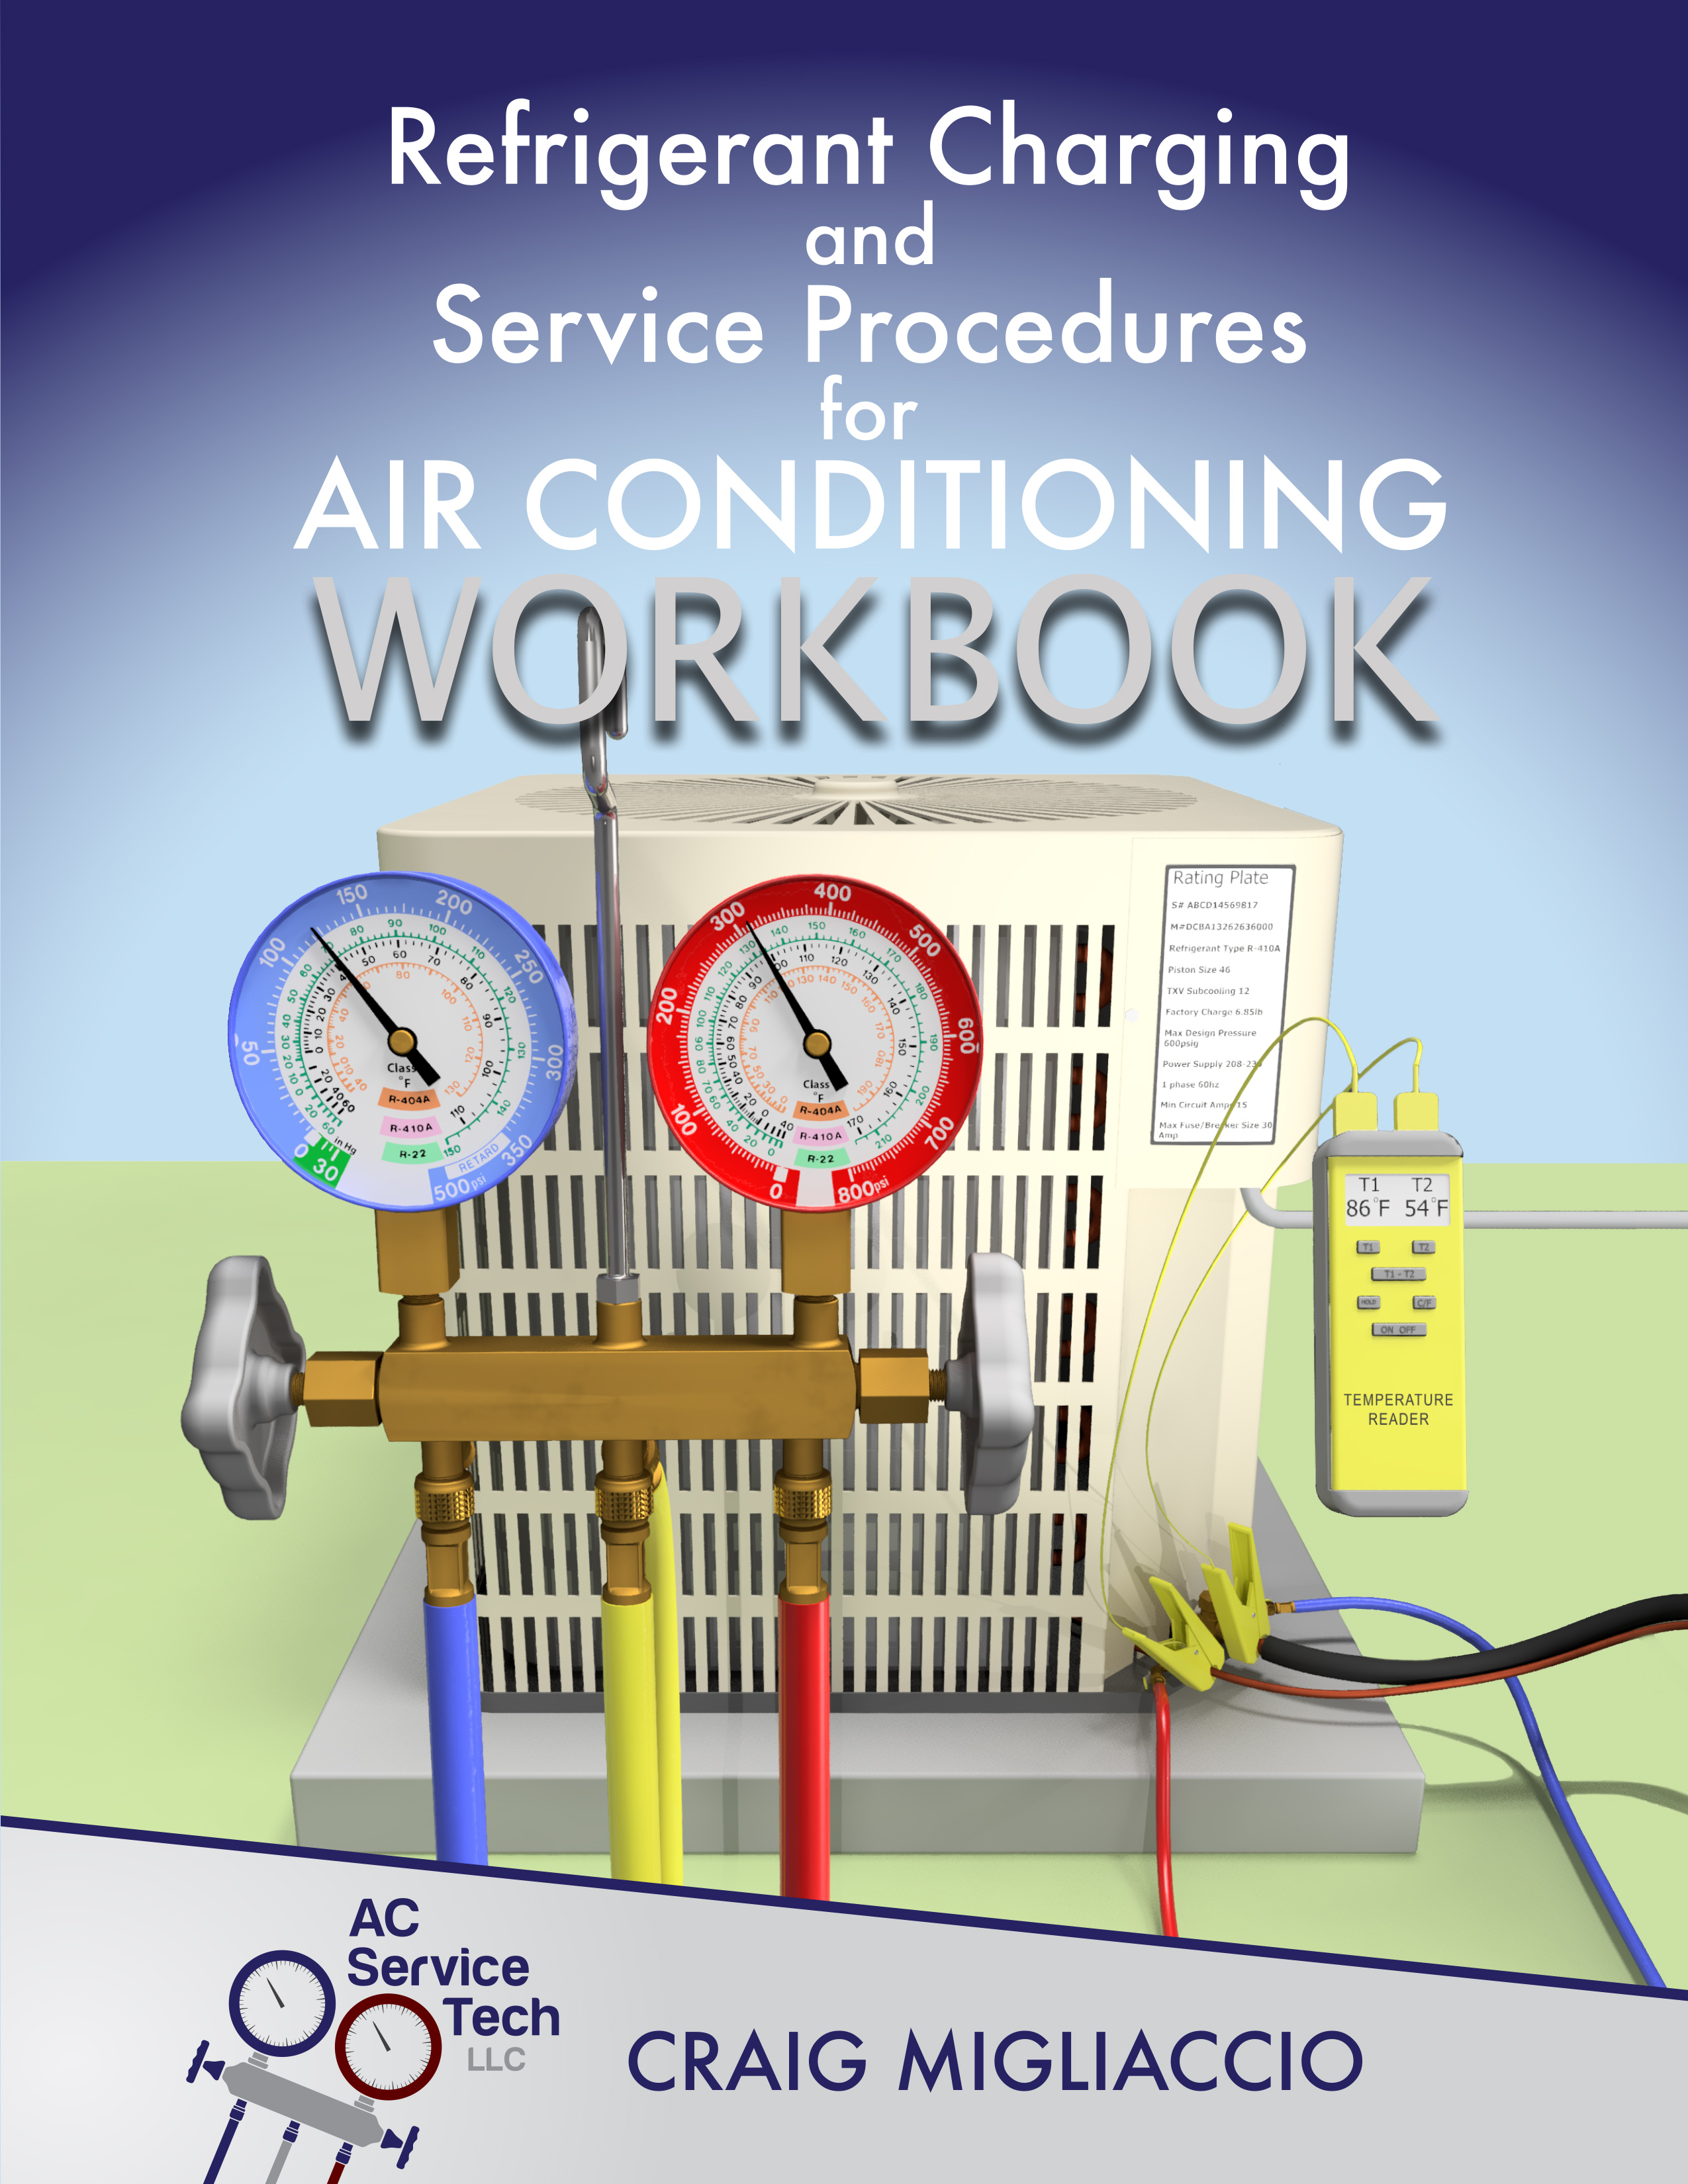 Workbook - Refrigerant Charging and Service Procedures for Air Conditioning